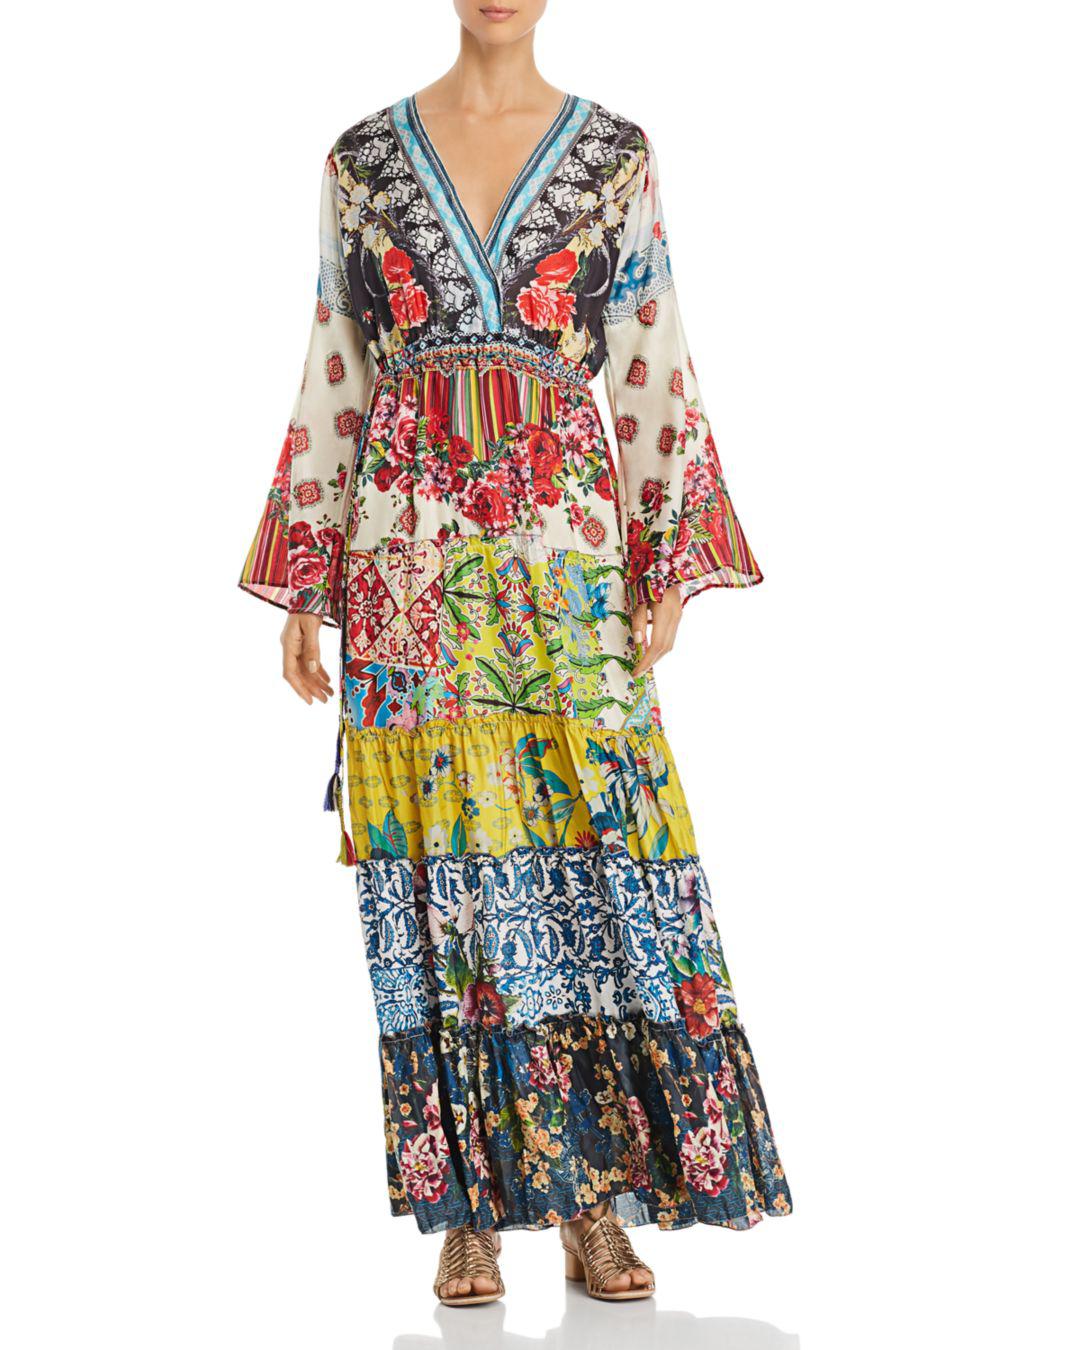 Lyst - Johnny Was Dibble Mixed-print Tiered Maxi Dress in Blue